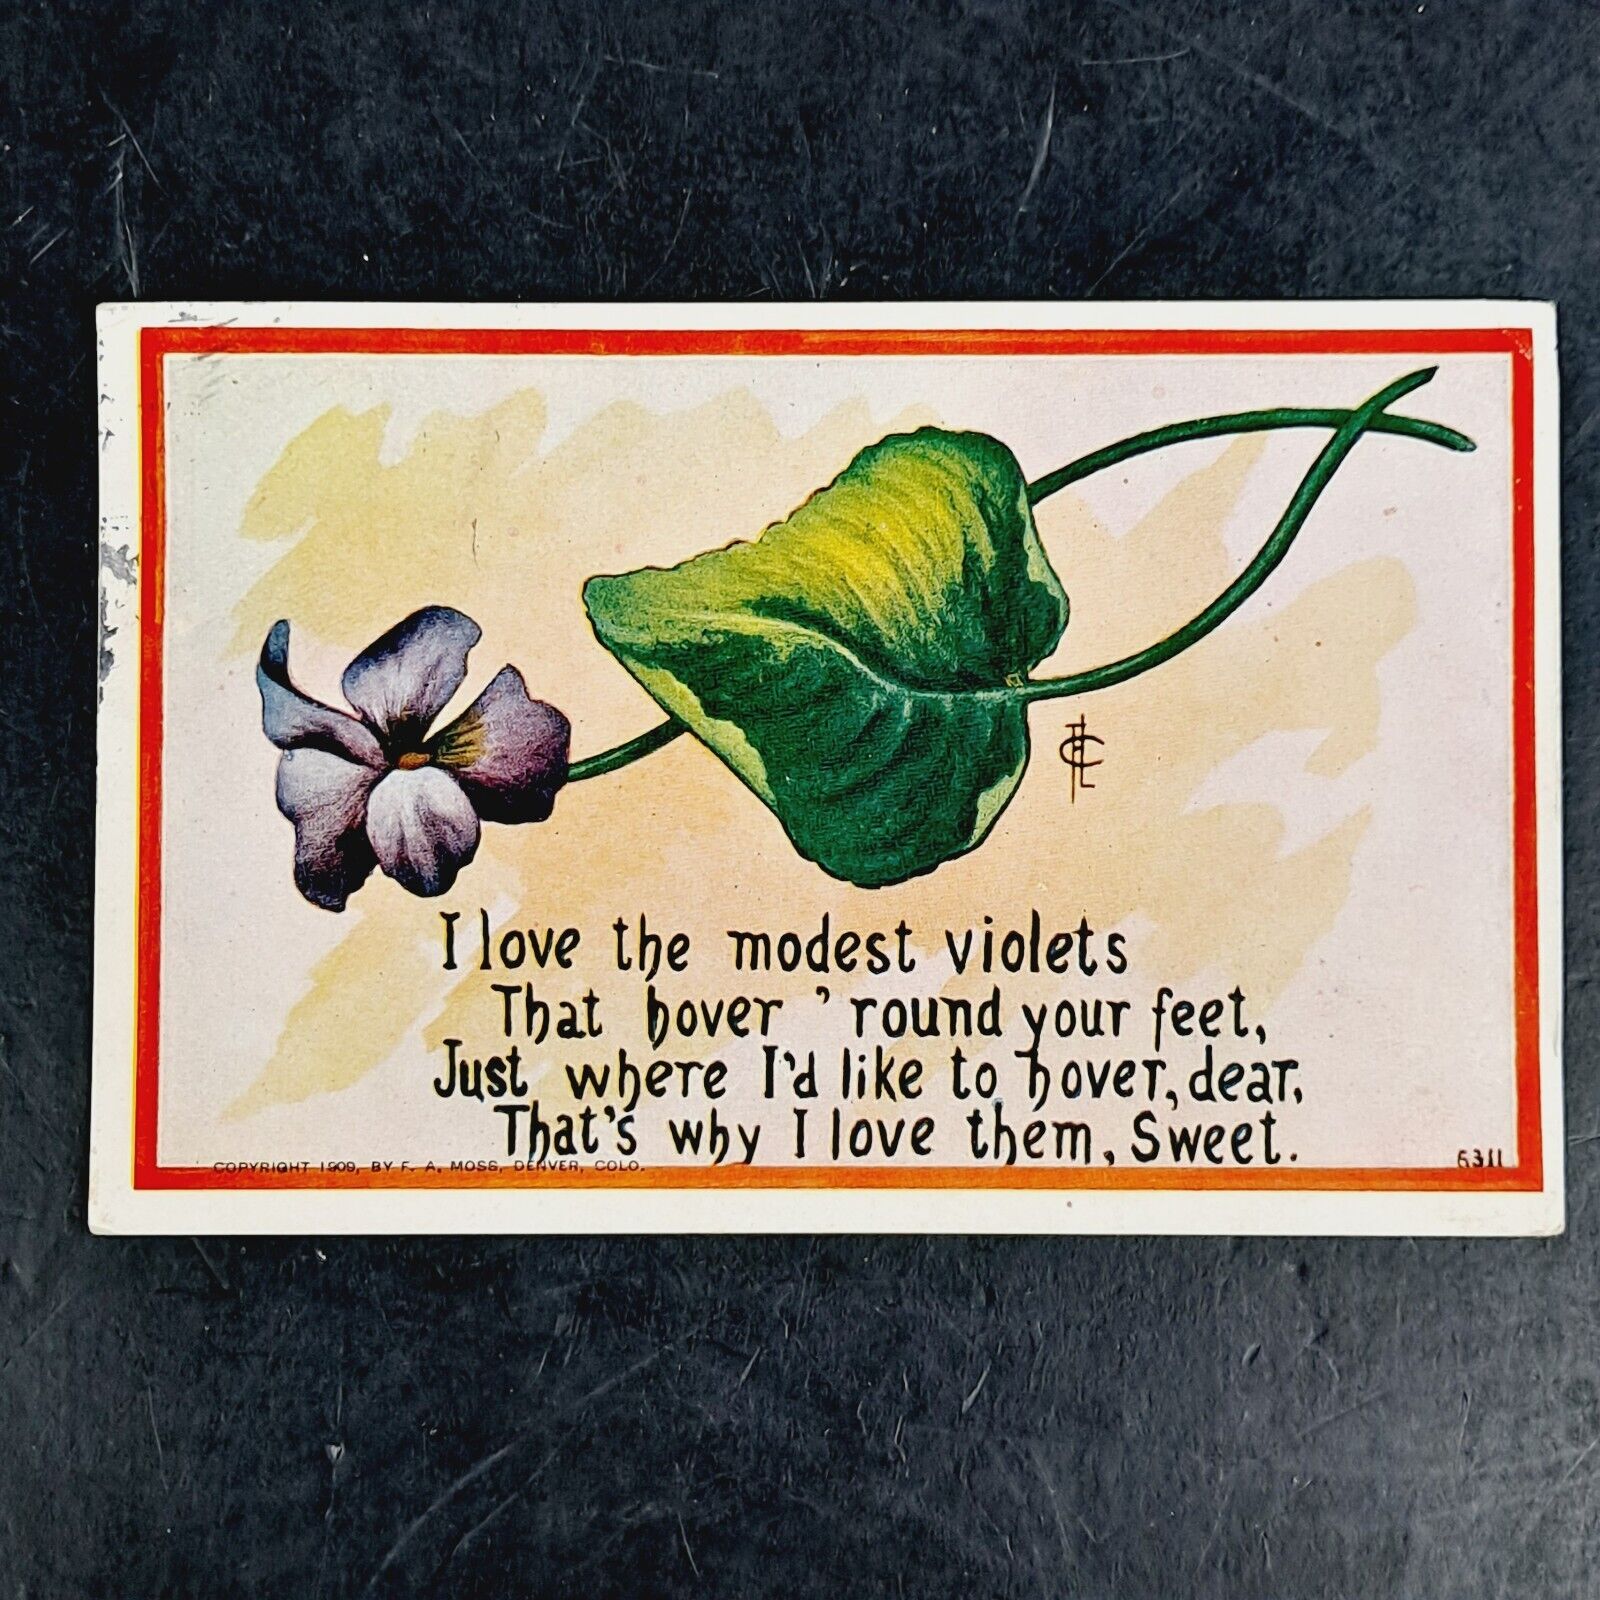 ANTIQUE 1909 DB FRED L. CAVALLY SIGNED ROMANTIC POST CARD WITH VIOLETS POSTED